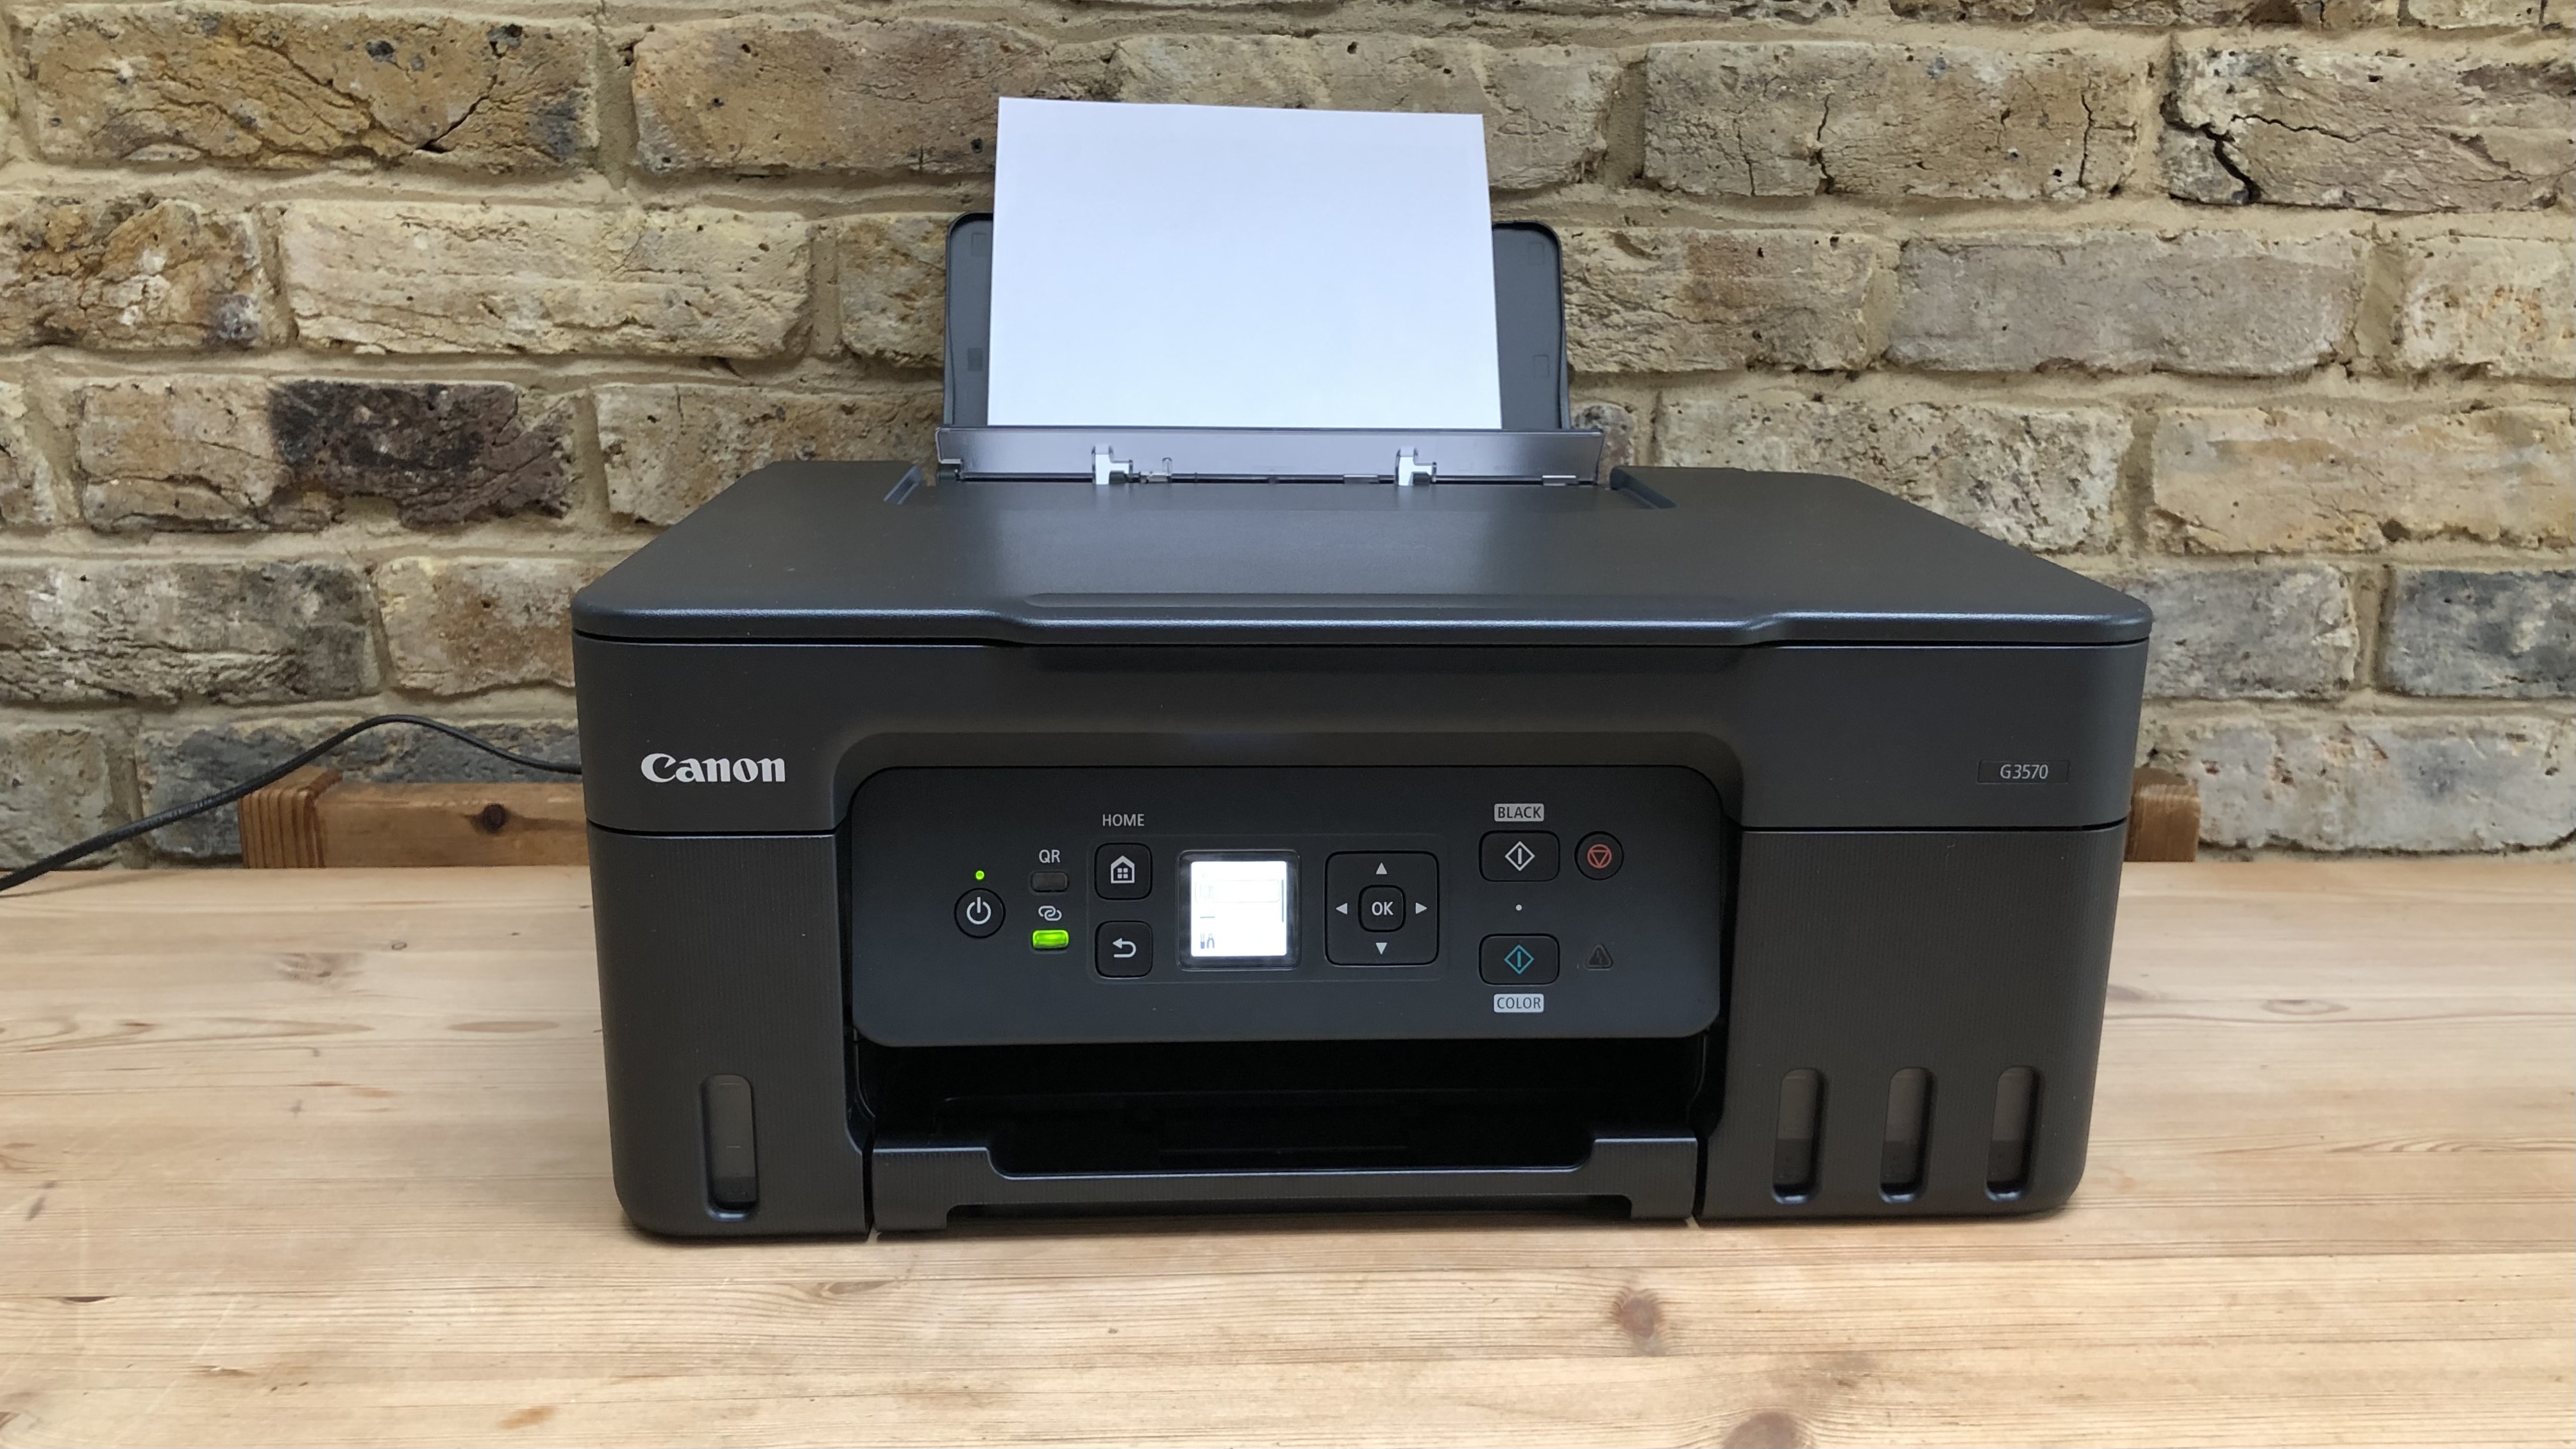 Canon G650/G620 MegaTank photo printer review, Very low costs prints